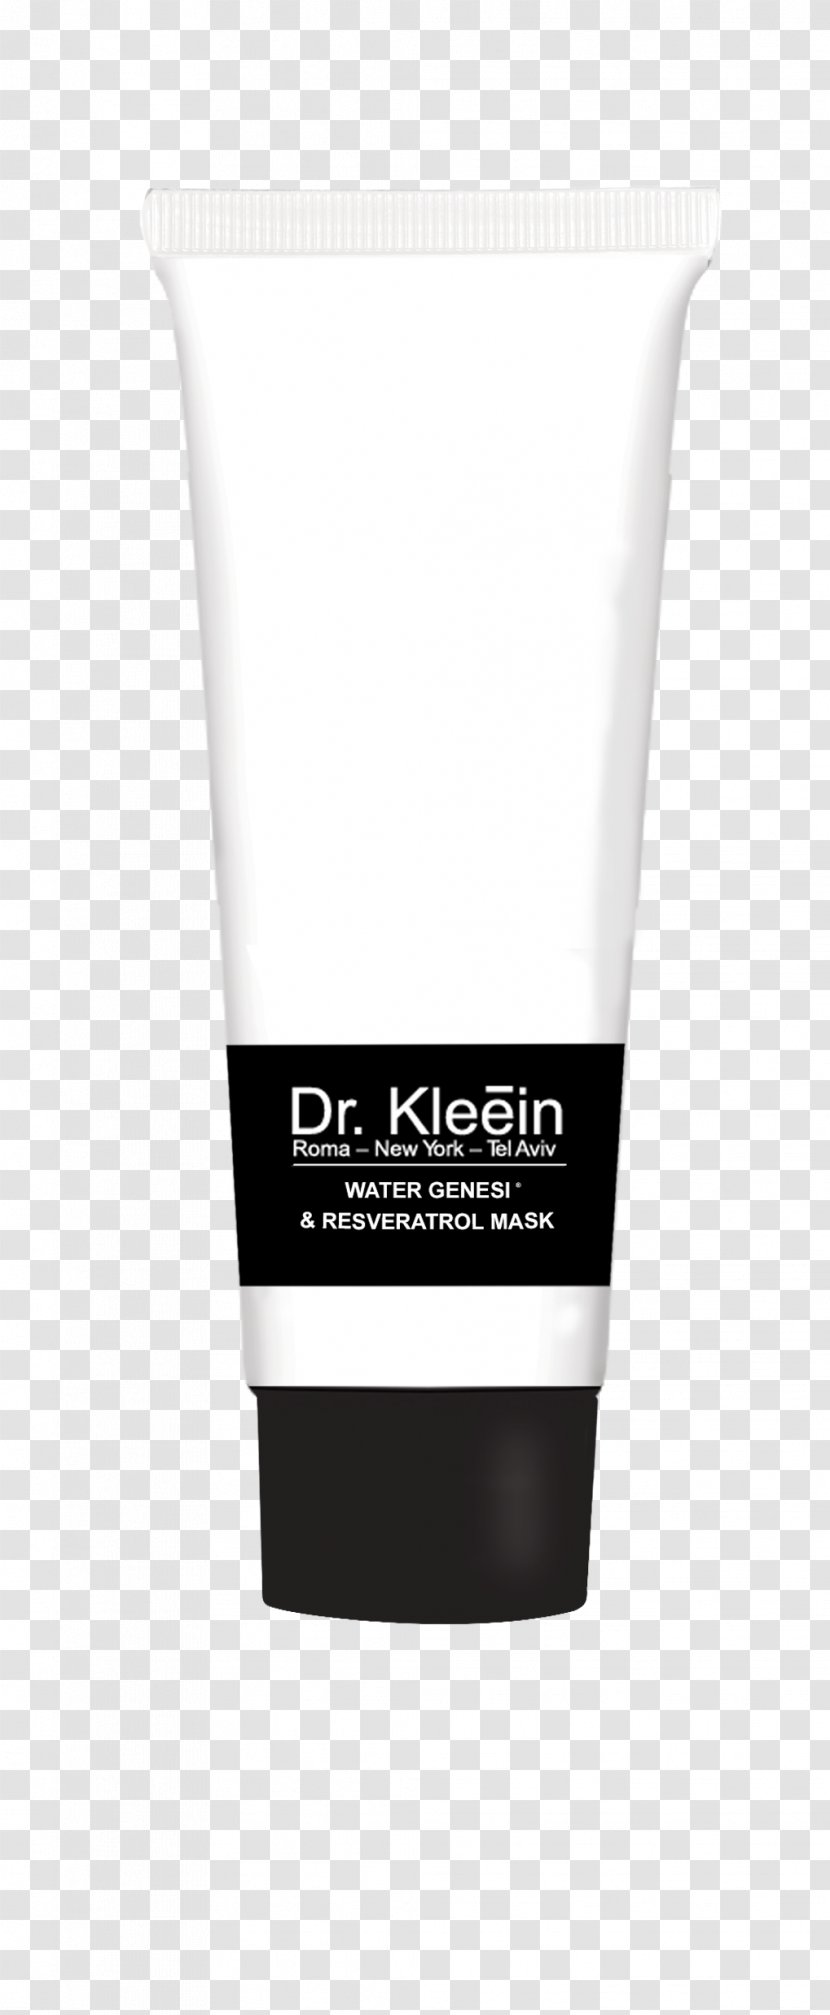 Cream - Skin Care - Phylosophy Transparent PNG